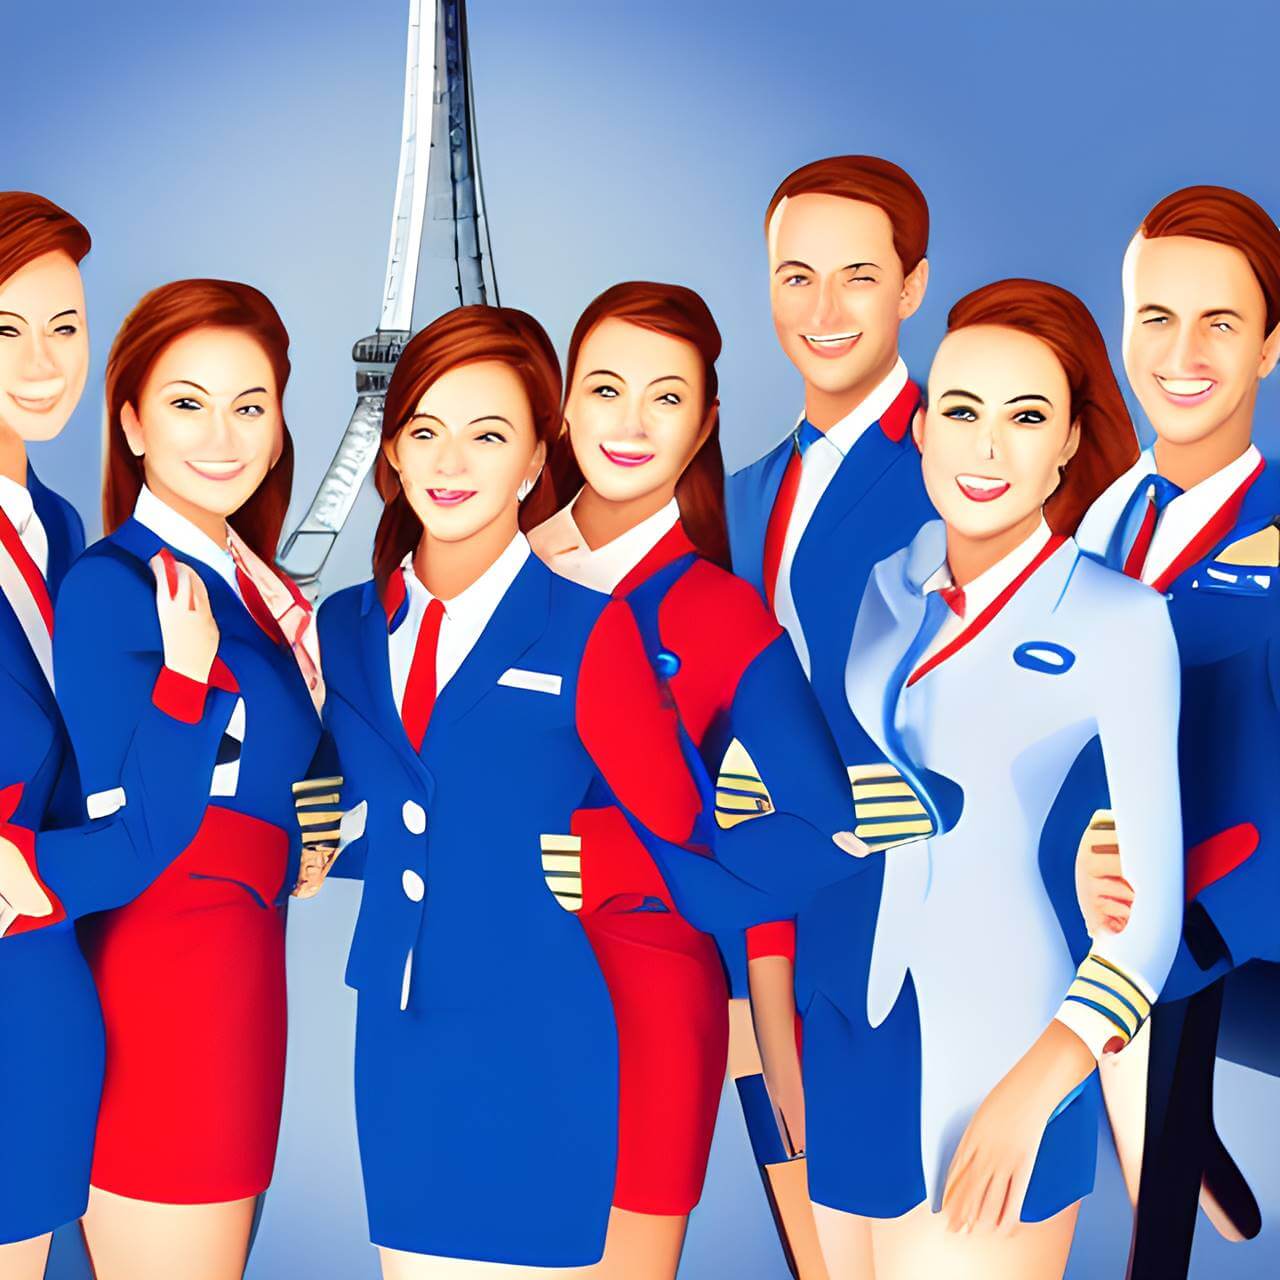 How to become a flight attendant in France